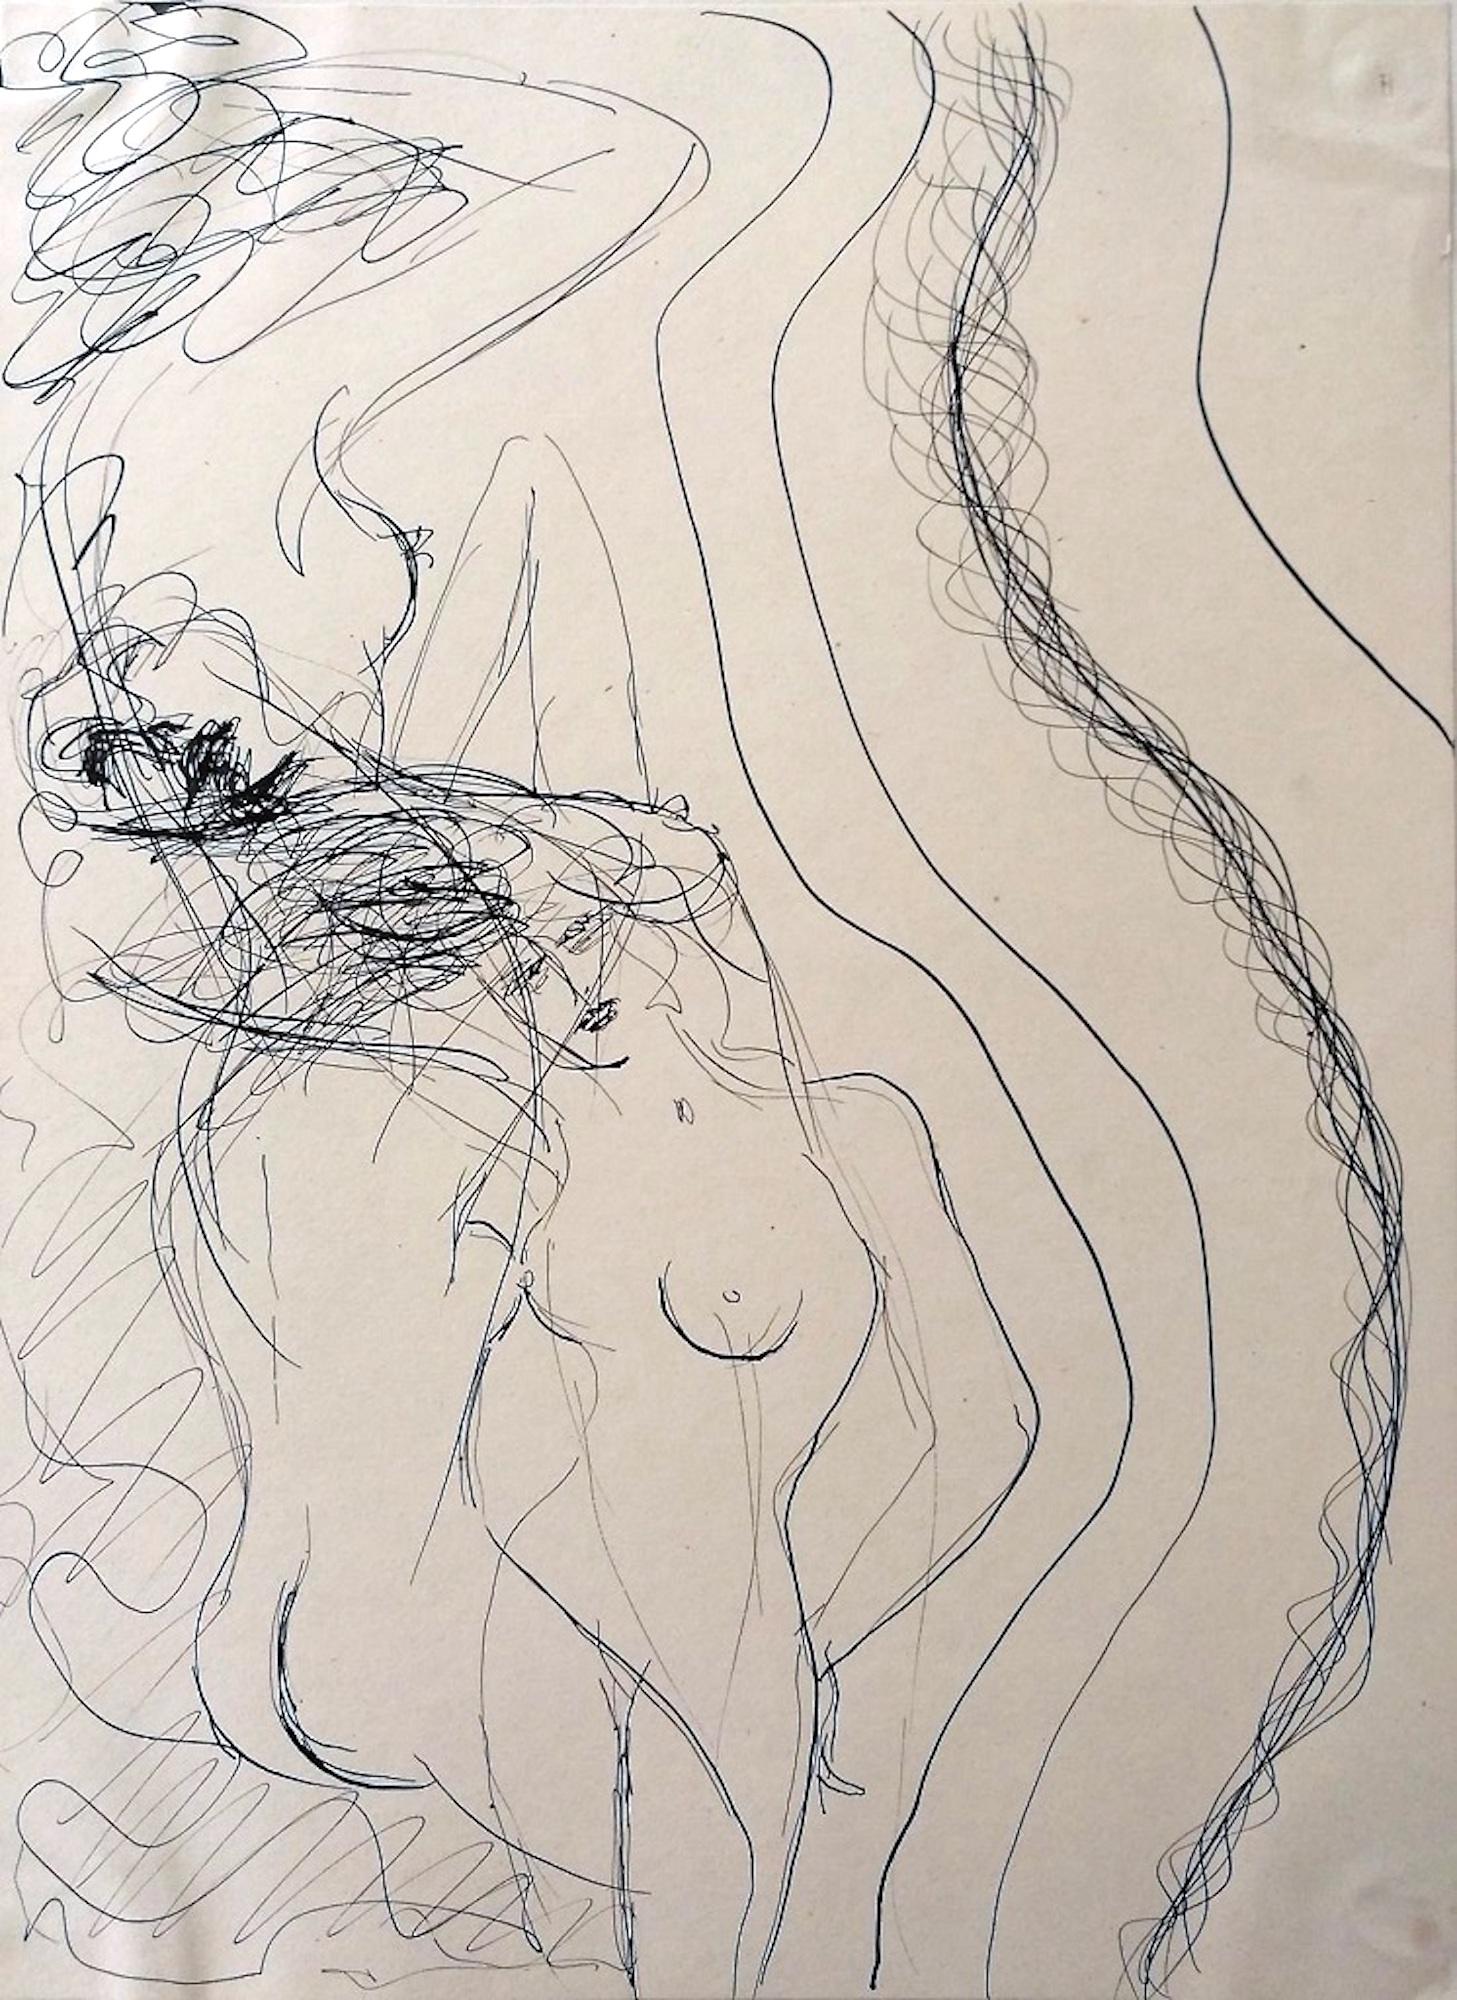 Female Nudes is an original artwork realized by Maurice Rouzée in the 1940s. China ink on paper. The artwork is glued on a paper sheet. The artwork is in good conditions, though it has some folds on the upper margin. 

The drawing represents two